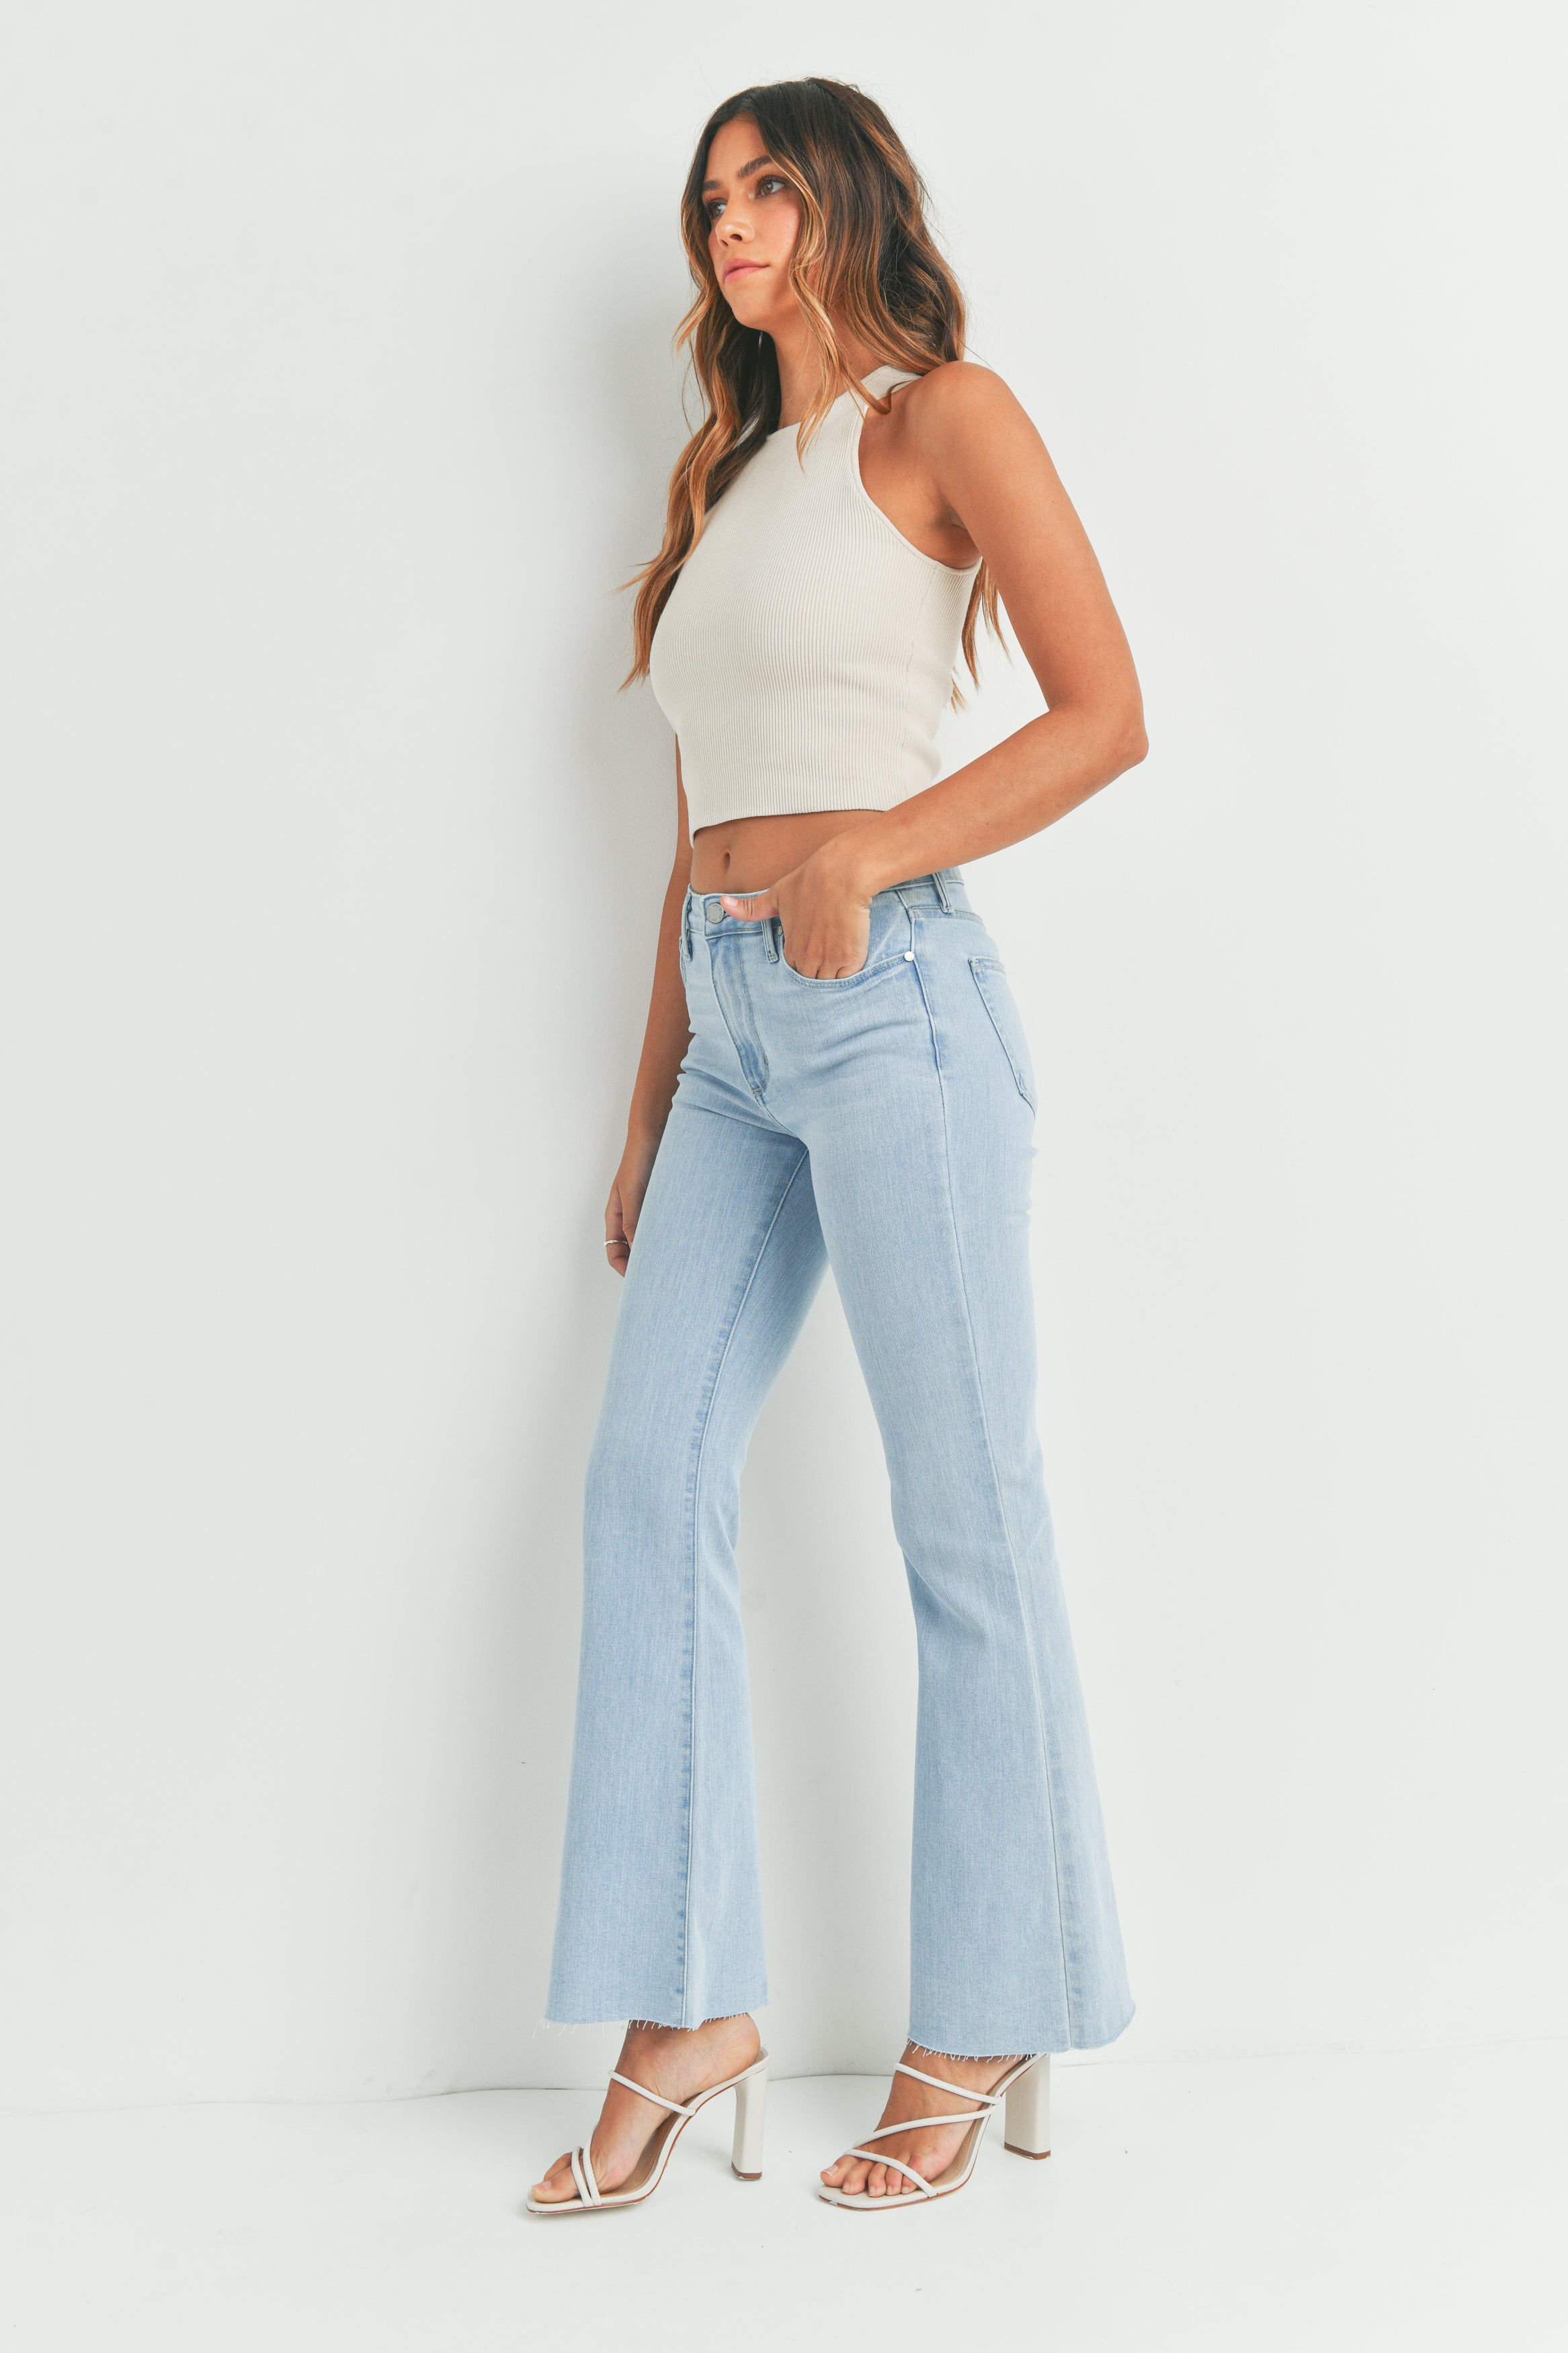 Jeans Hr Cut Flare